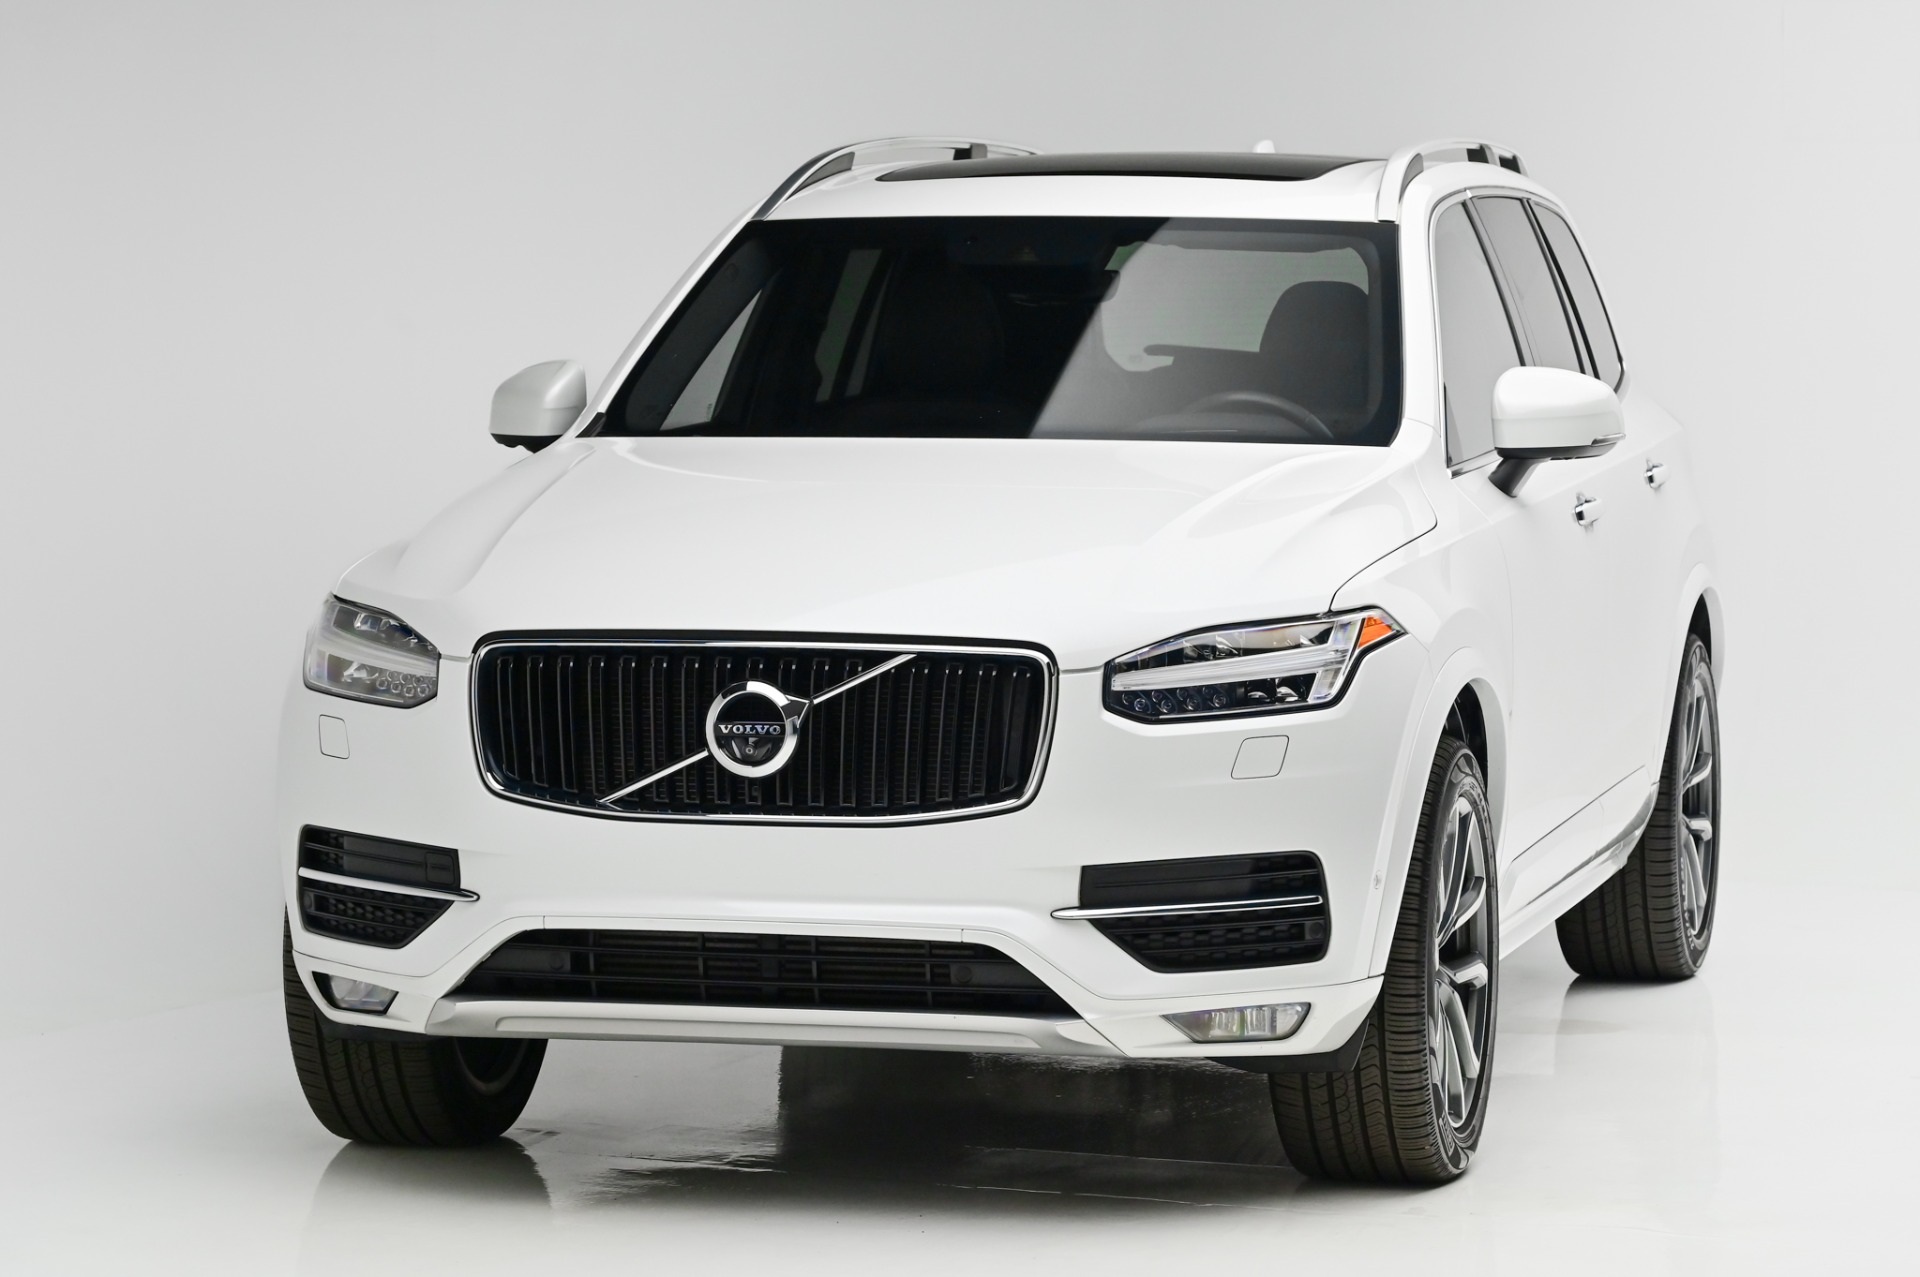 Used 2017 Volvo XC90 T6 Momentum Momentum For Sale (Sold)